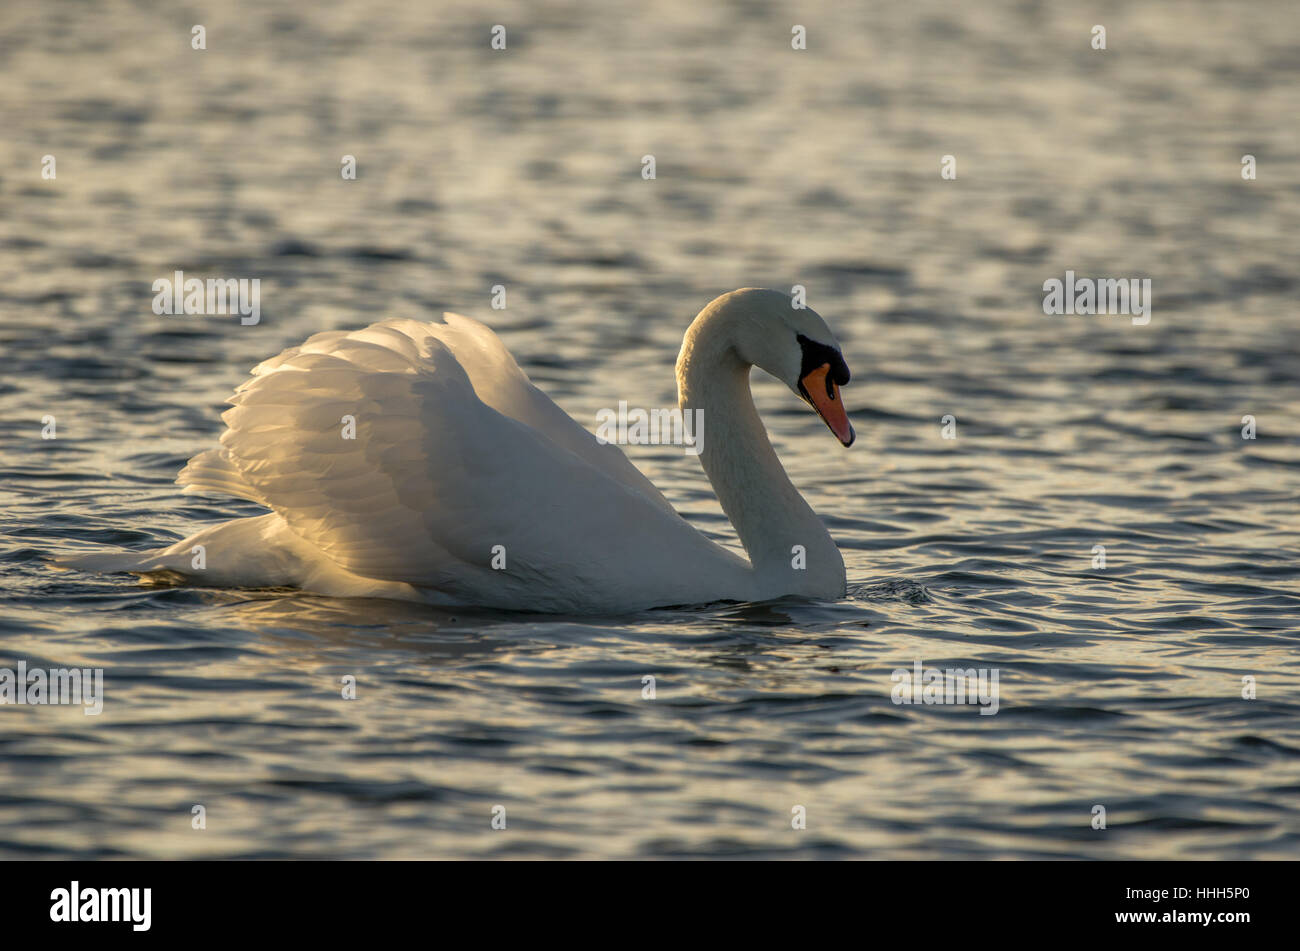 A Mute Swan (Cygnus olor) with its wings lit by the sun as it swims on a lake Stock Photo